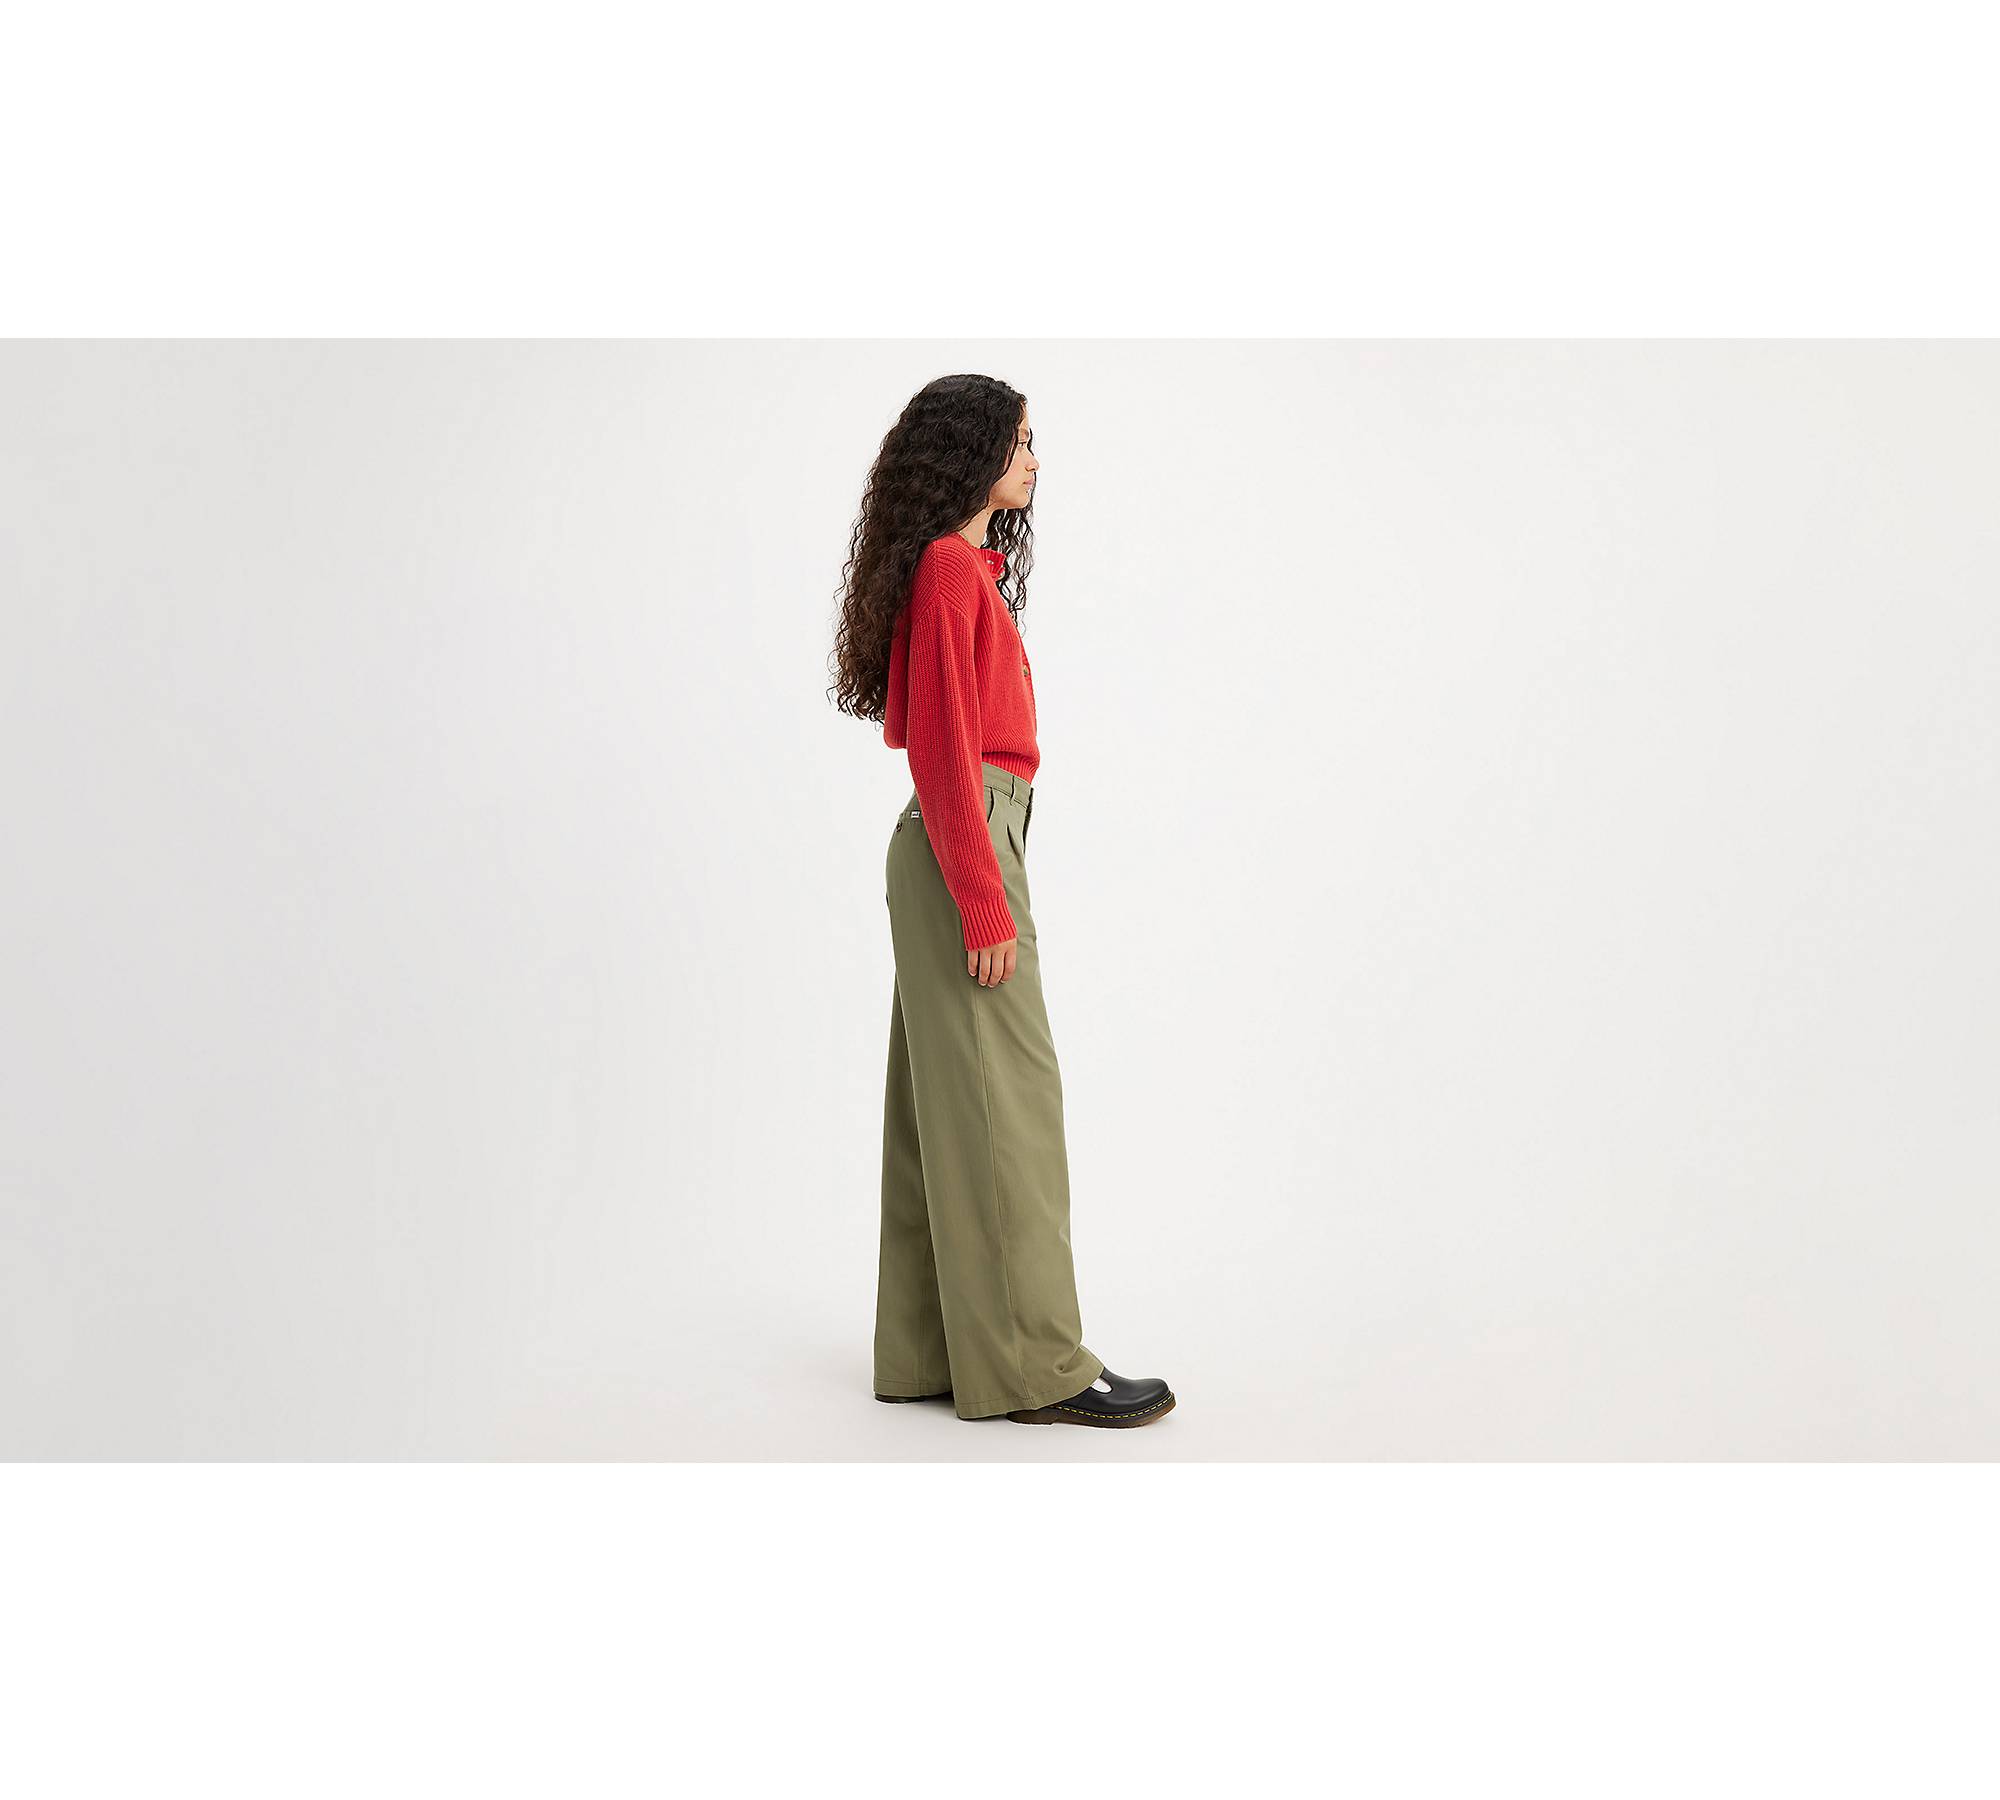 PLEATED WIDE PANTS